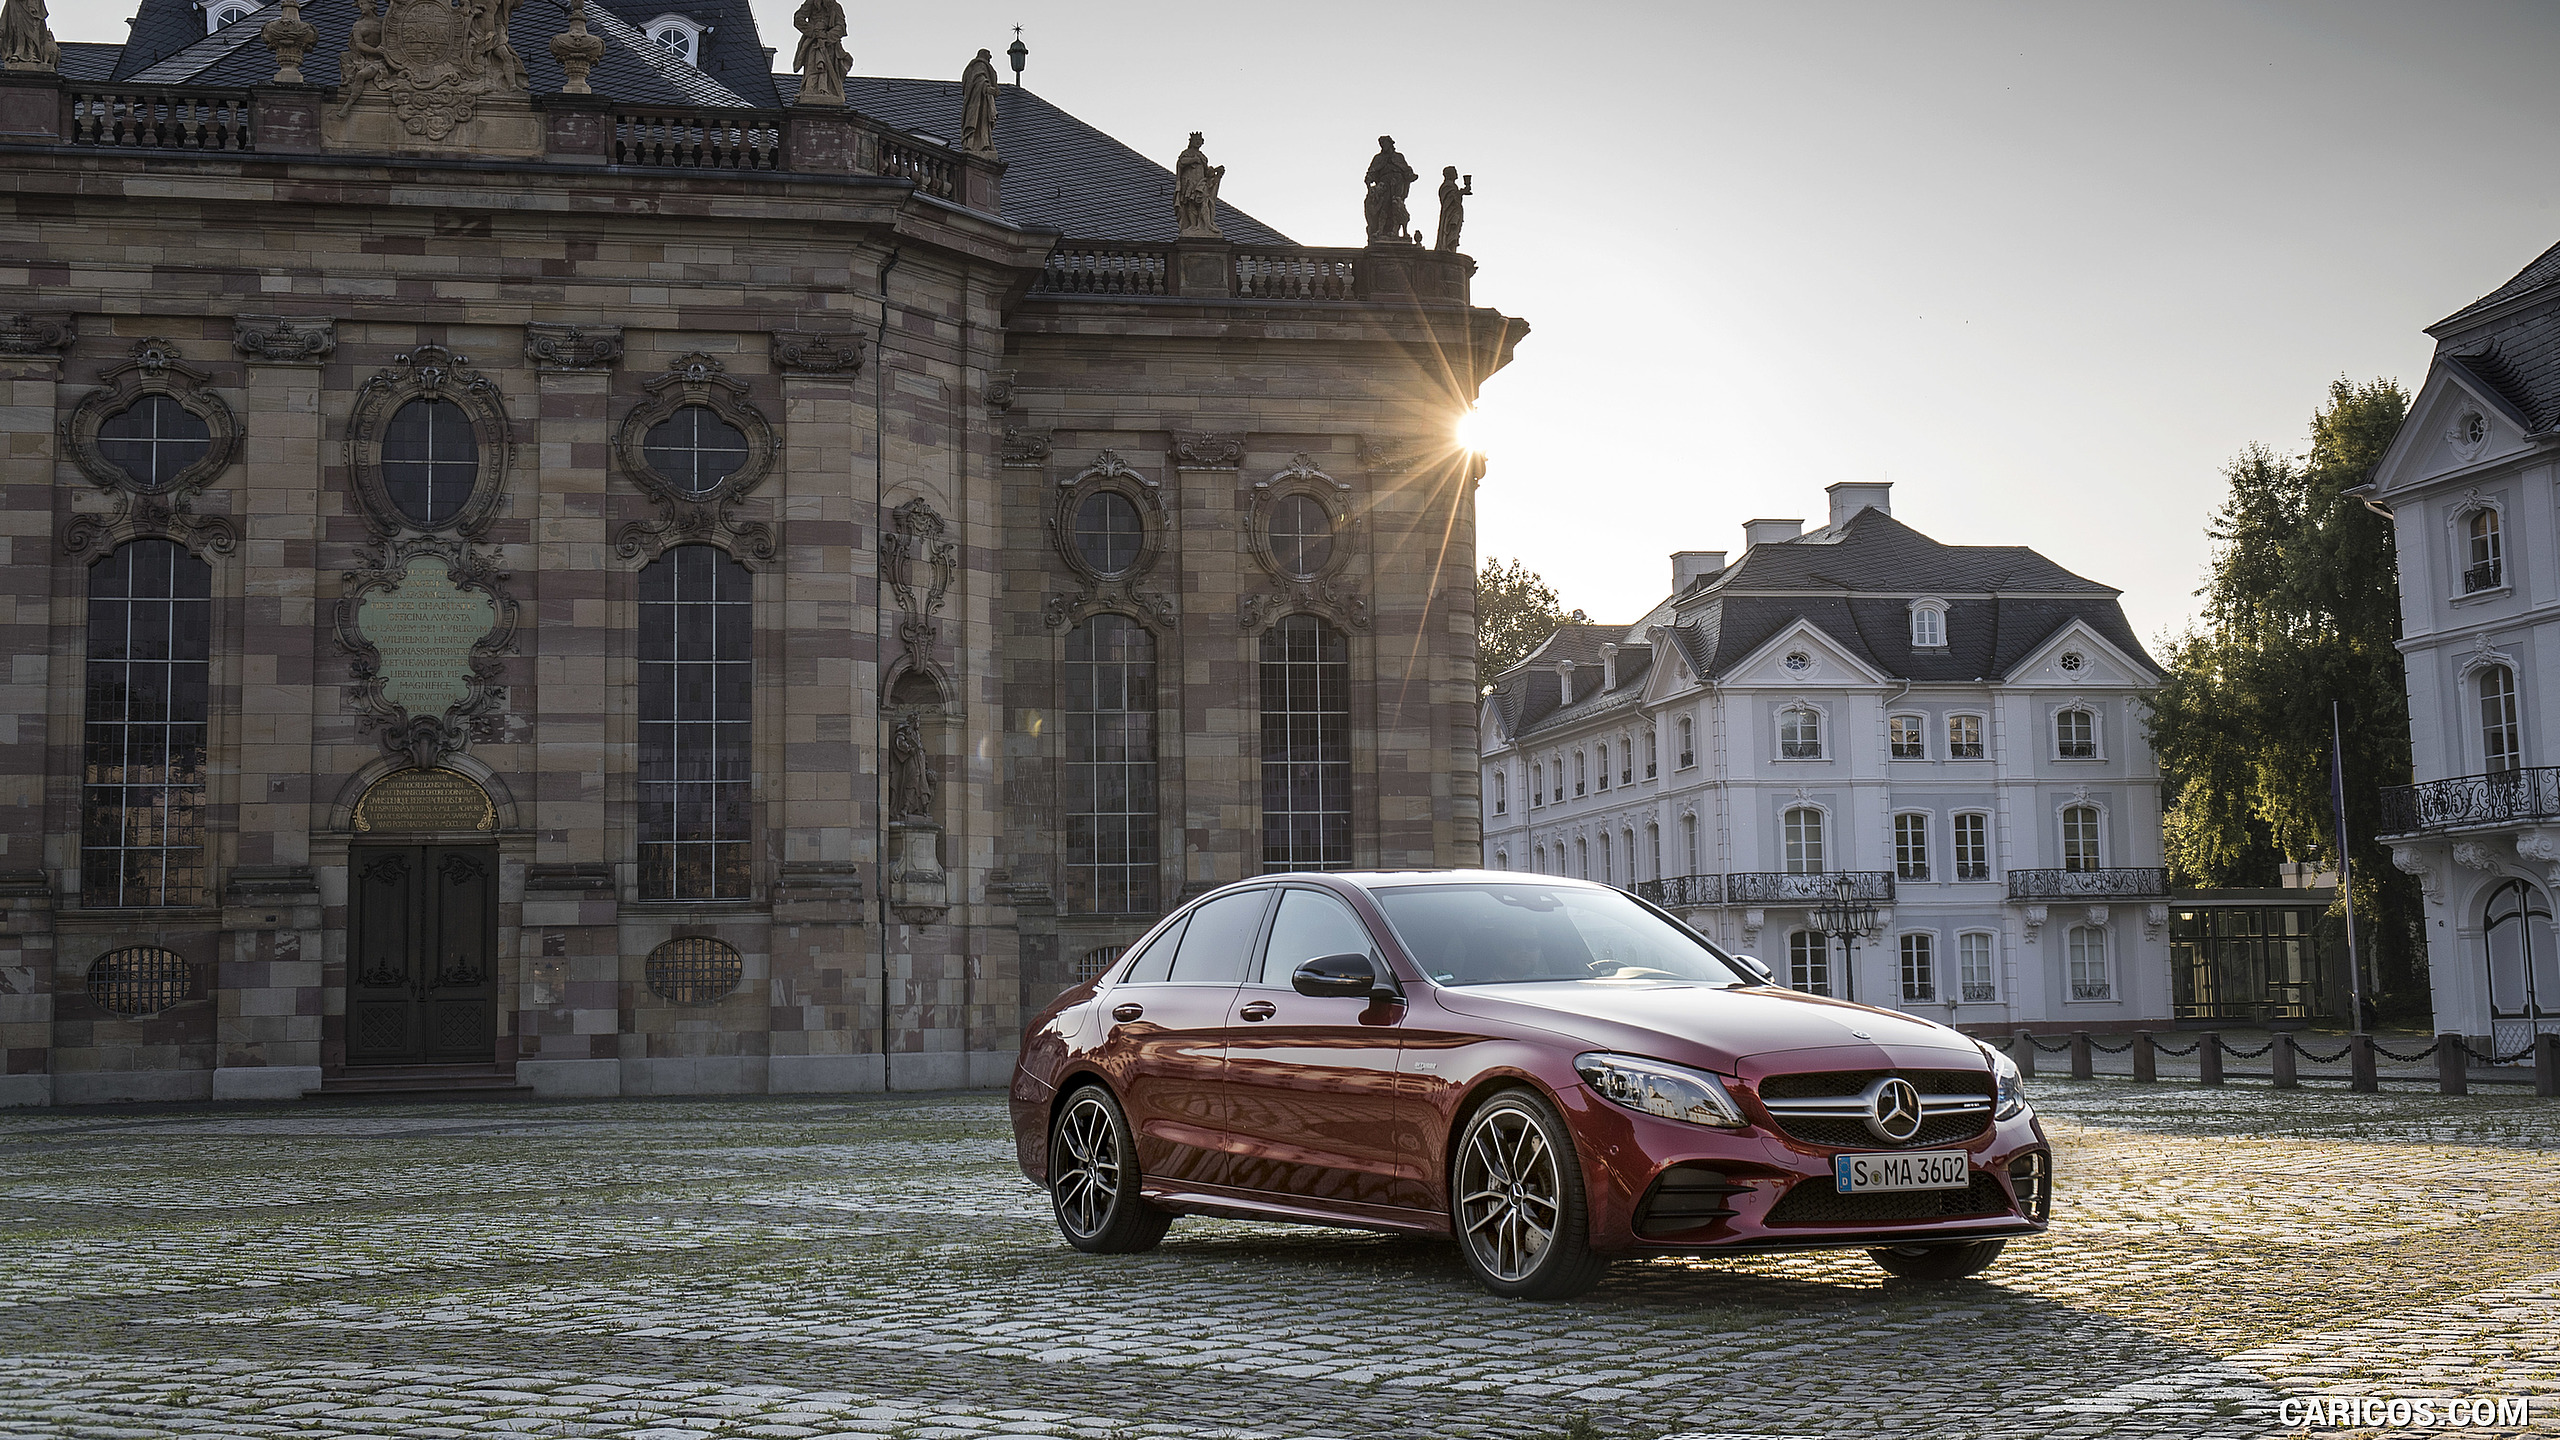 2019 Mercedes-AMG C43 4MATIC Sedan (Color: Hyacinth Red) - Front Three-Quarter, #55 of 192